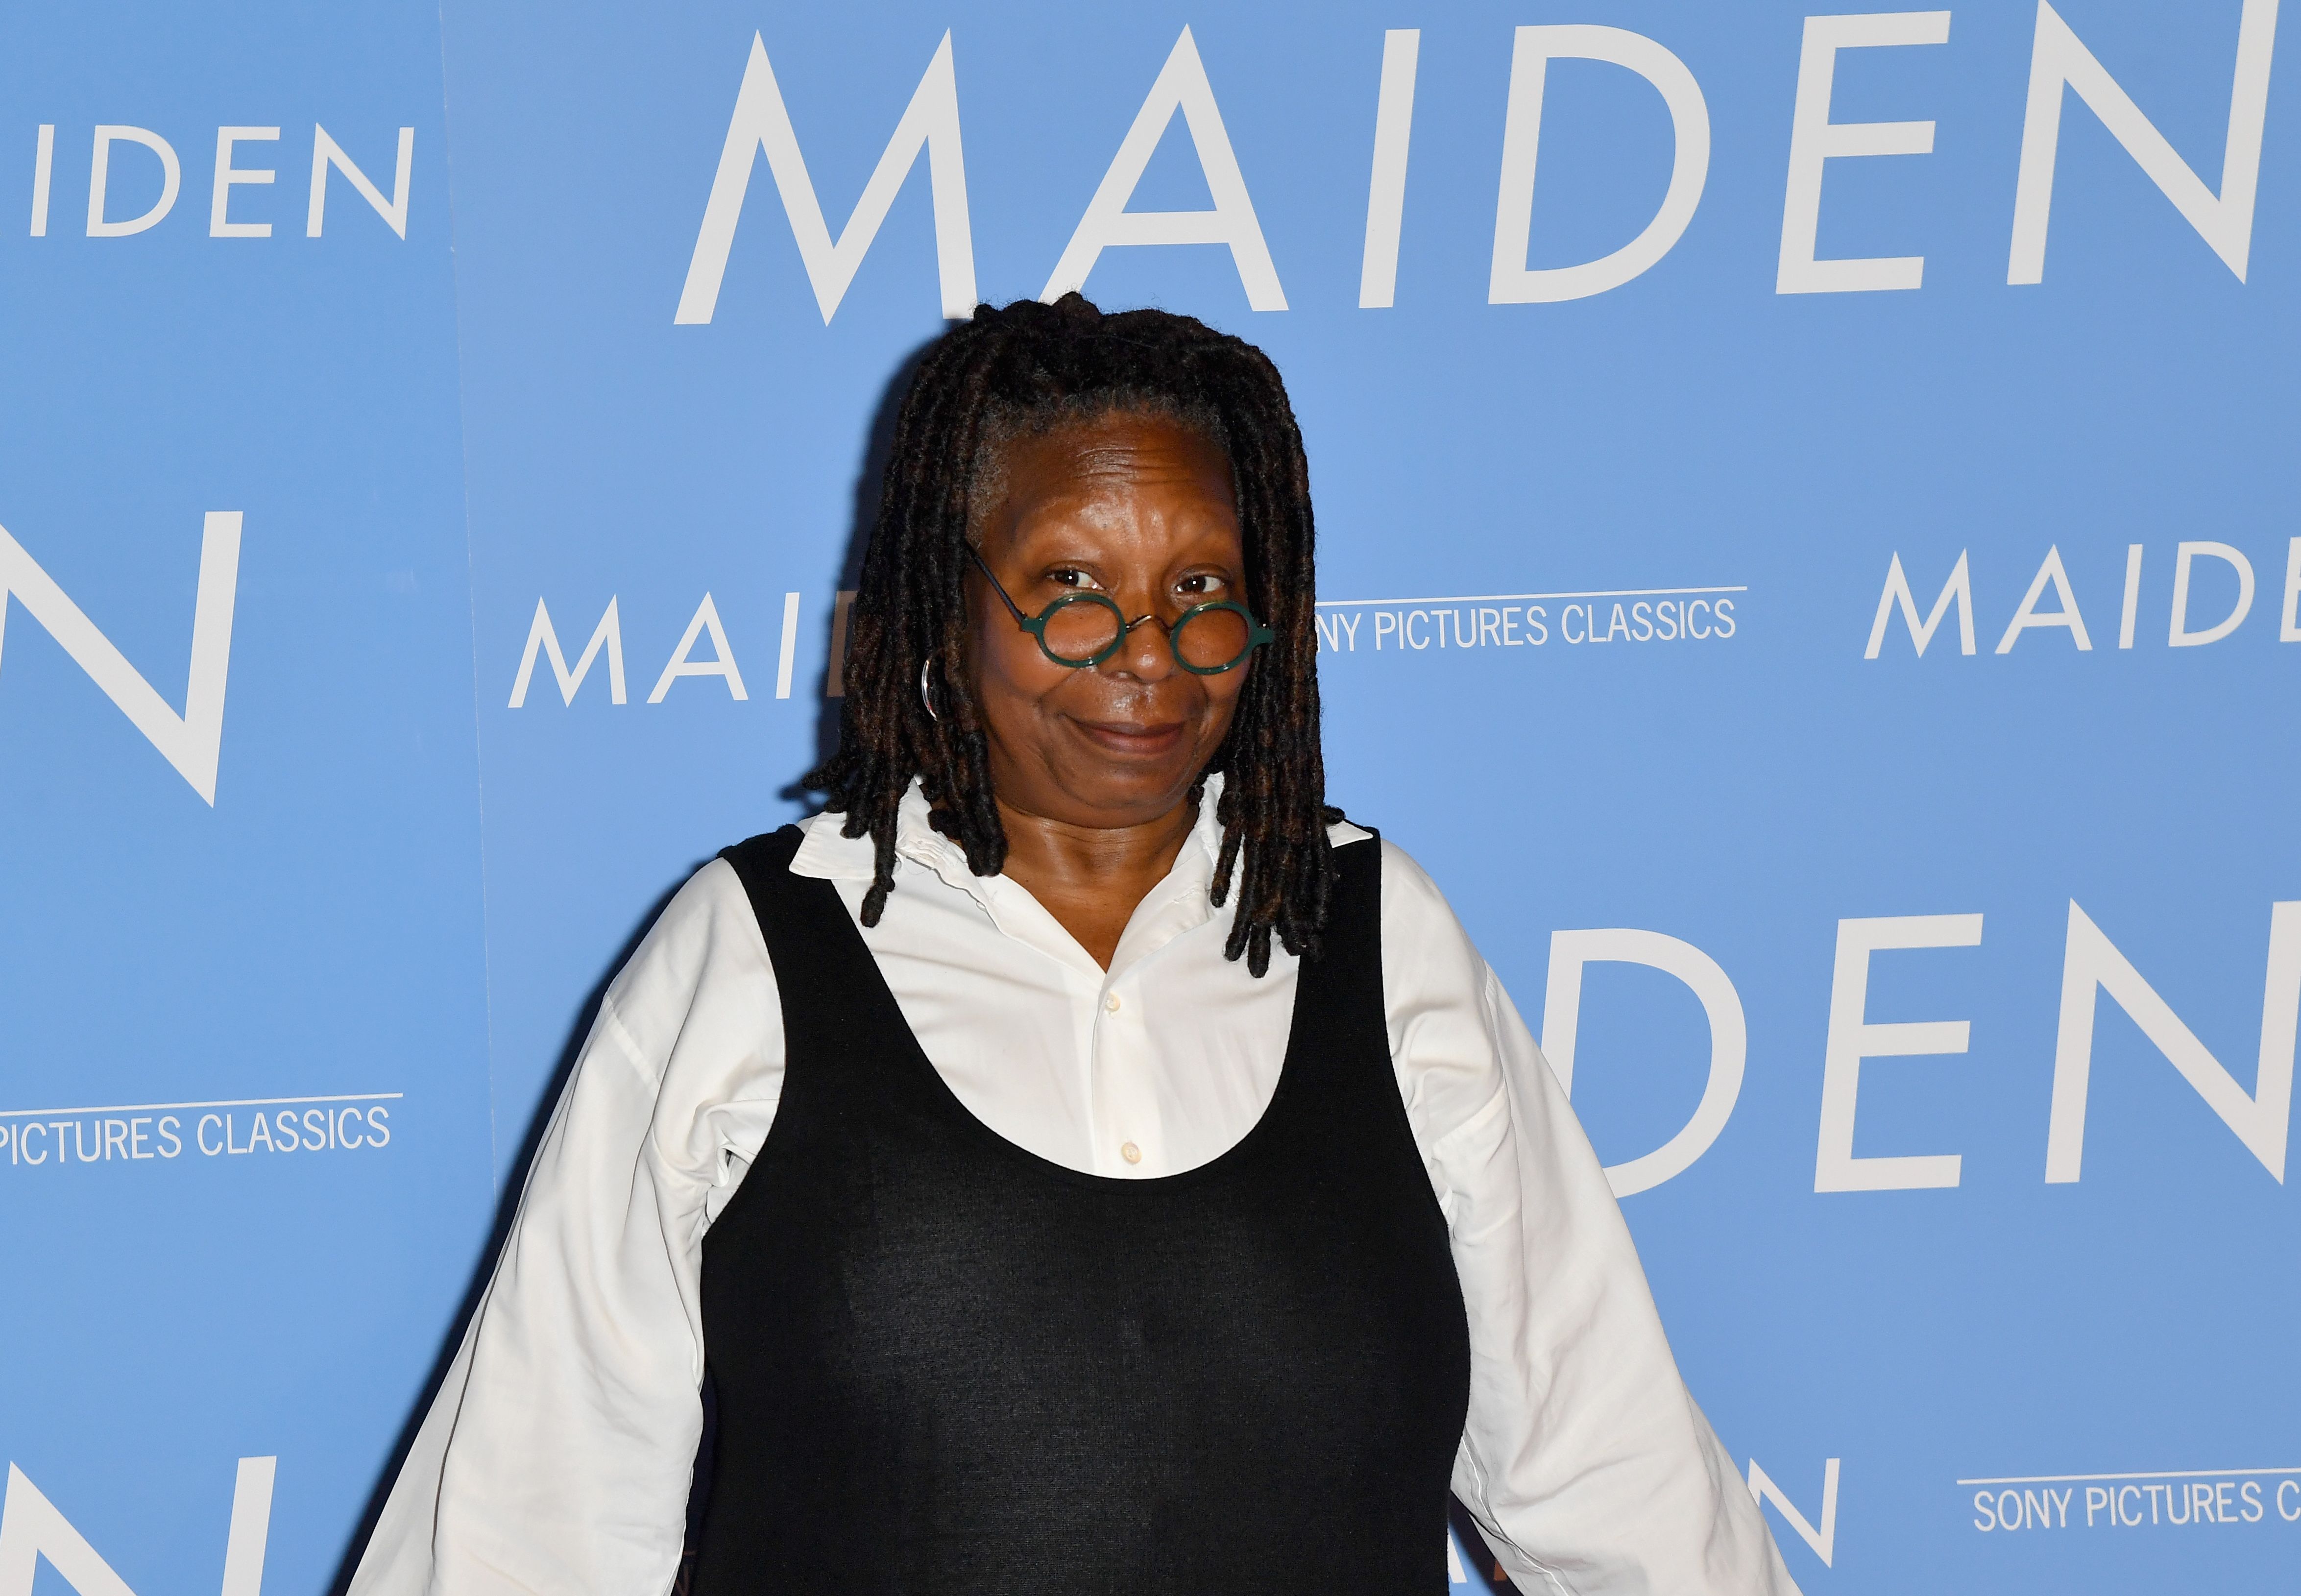 Whoopi Goldberg at an event in 2019